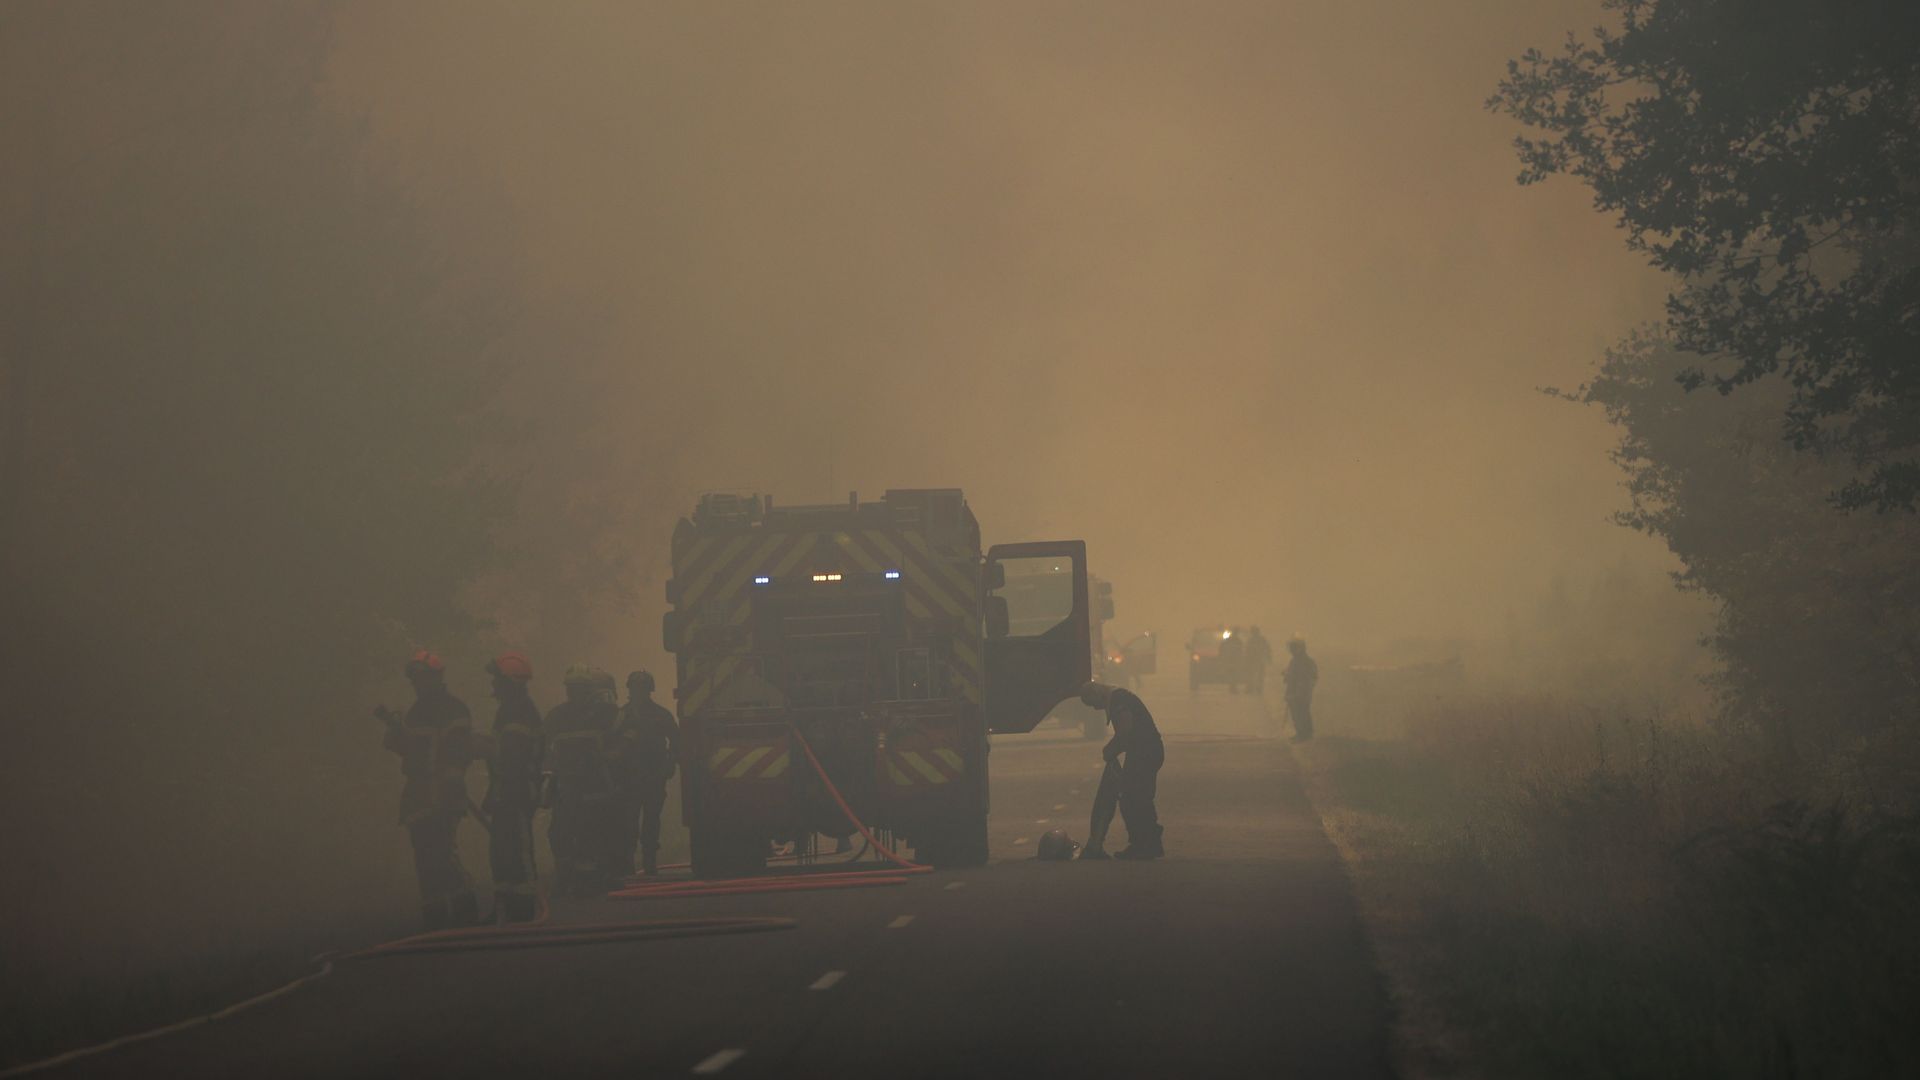 Firefighters try to control a forest fire near Louchats in Gironde, southwestern France on July 17.